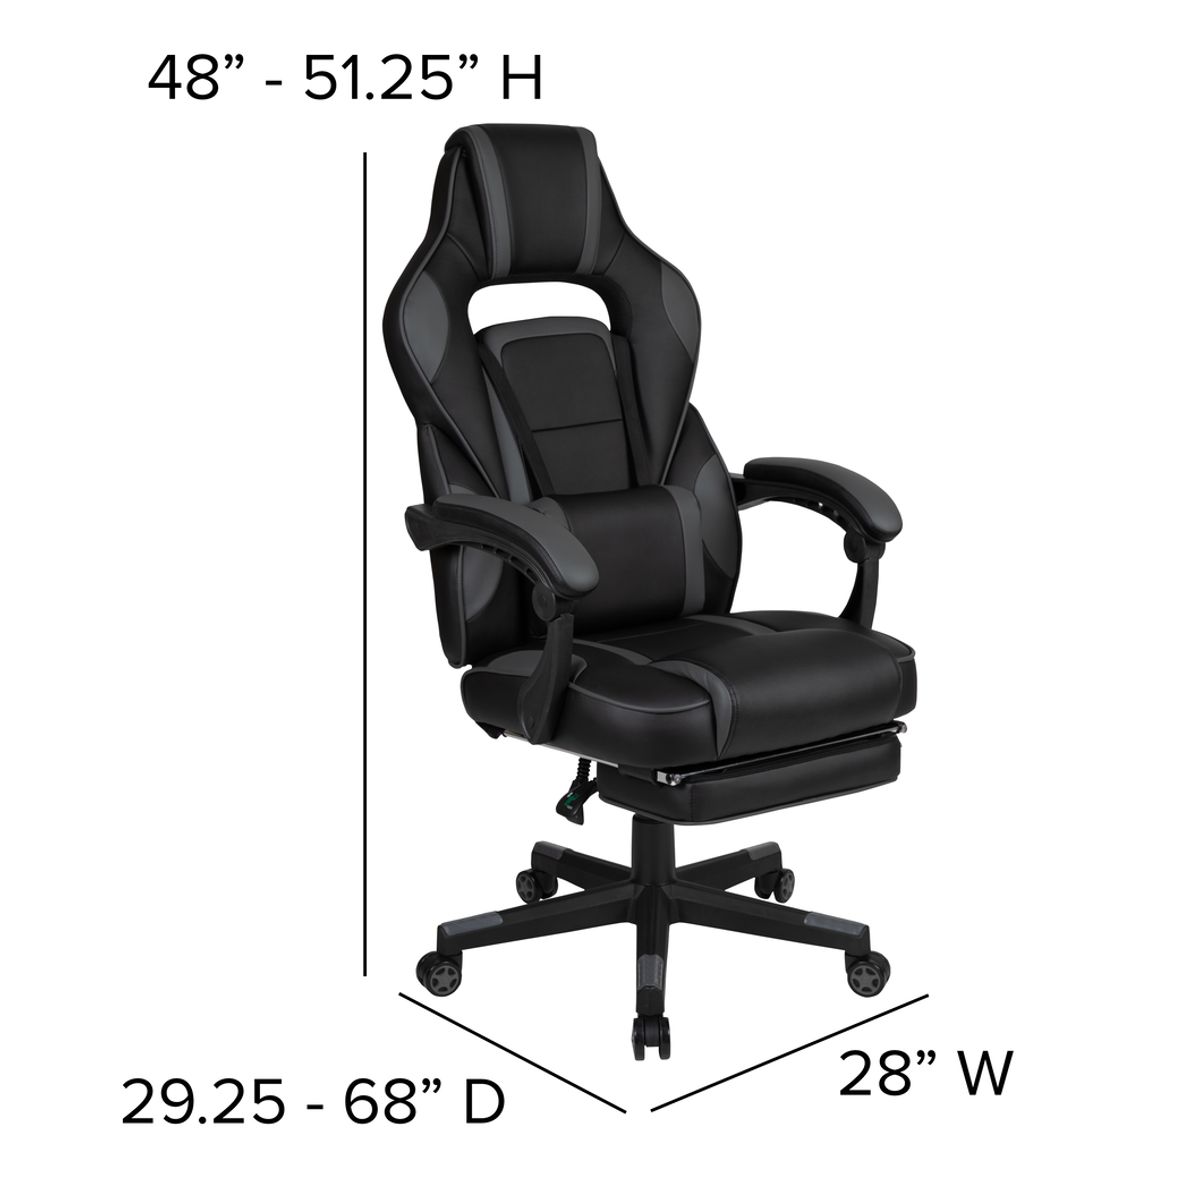 https://media.rtg-prprod.com/kids-exfor-gray-gaming-chair-with-footrest_38202886_alt-image-11?cache-id=429aa749a2c9ba6cca4091b92538ca9d&h=1190&w=1190